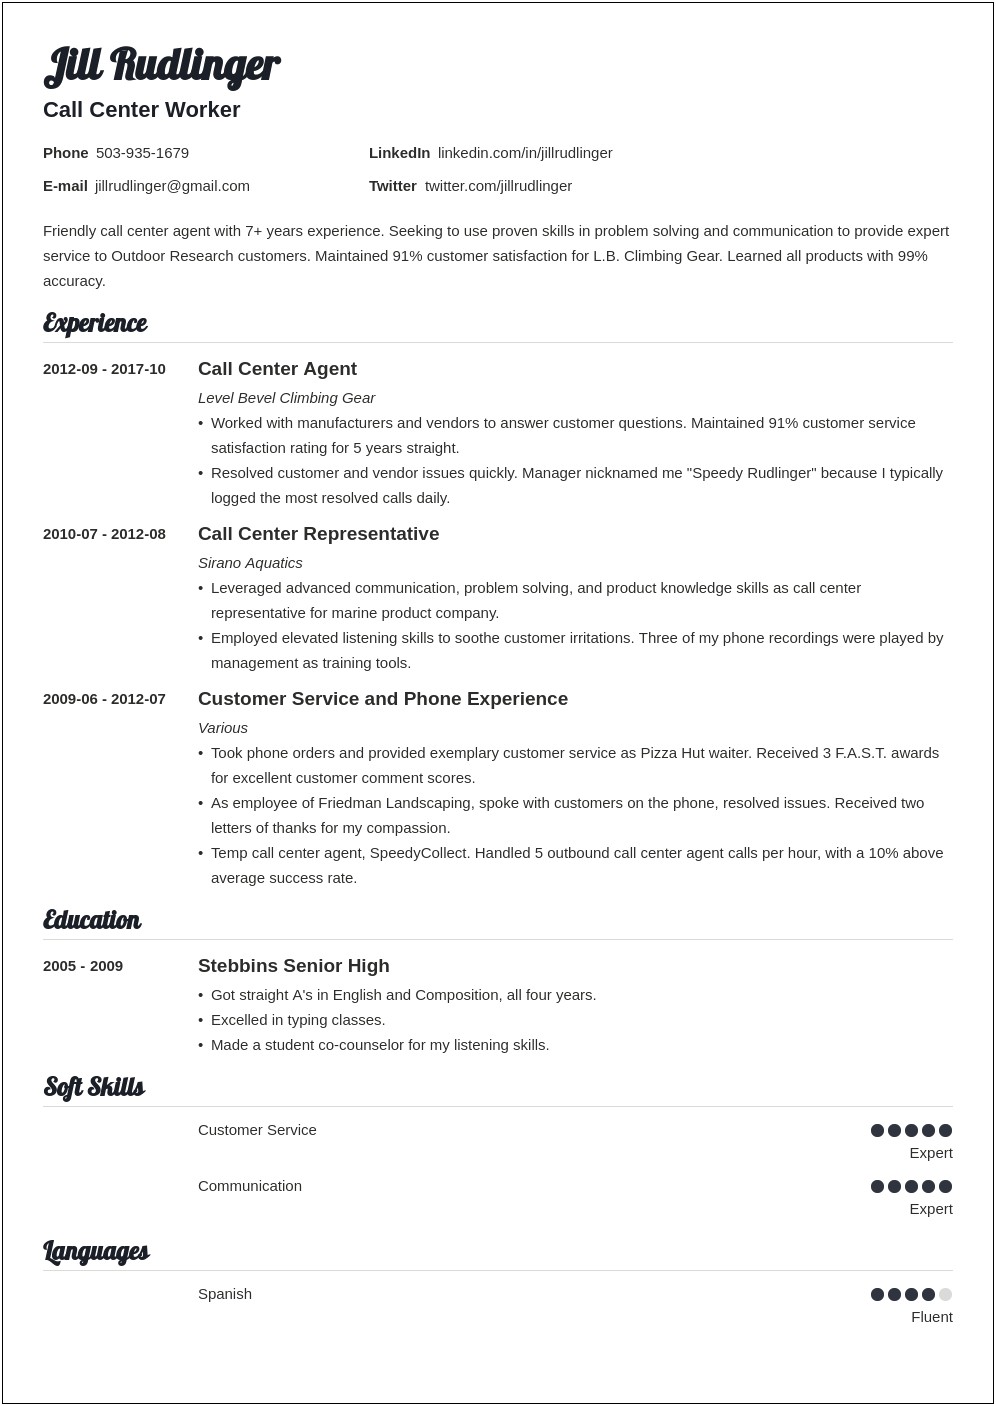 Resume For Call Center Job With Experience